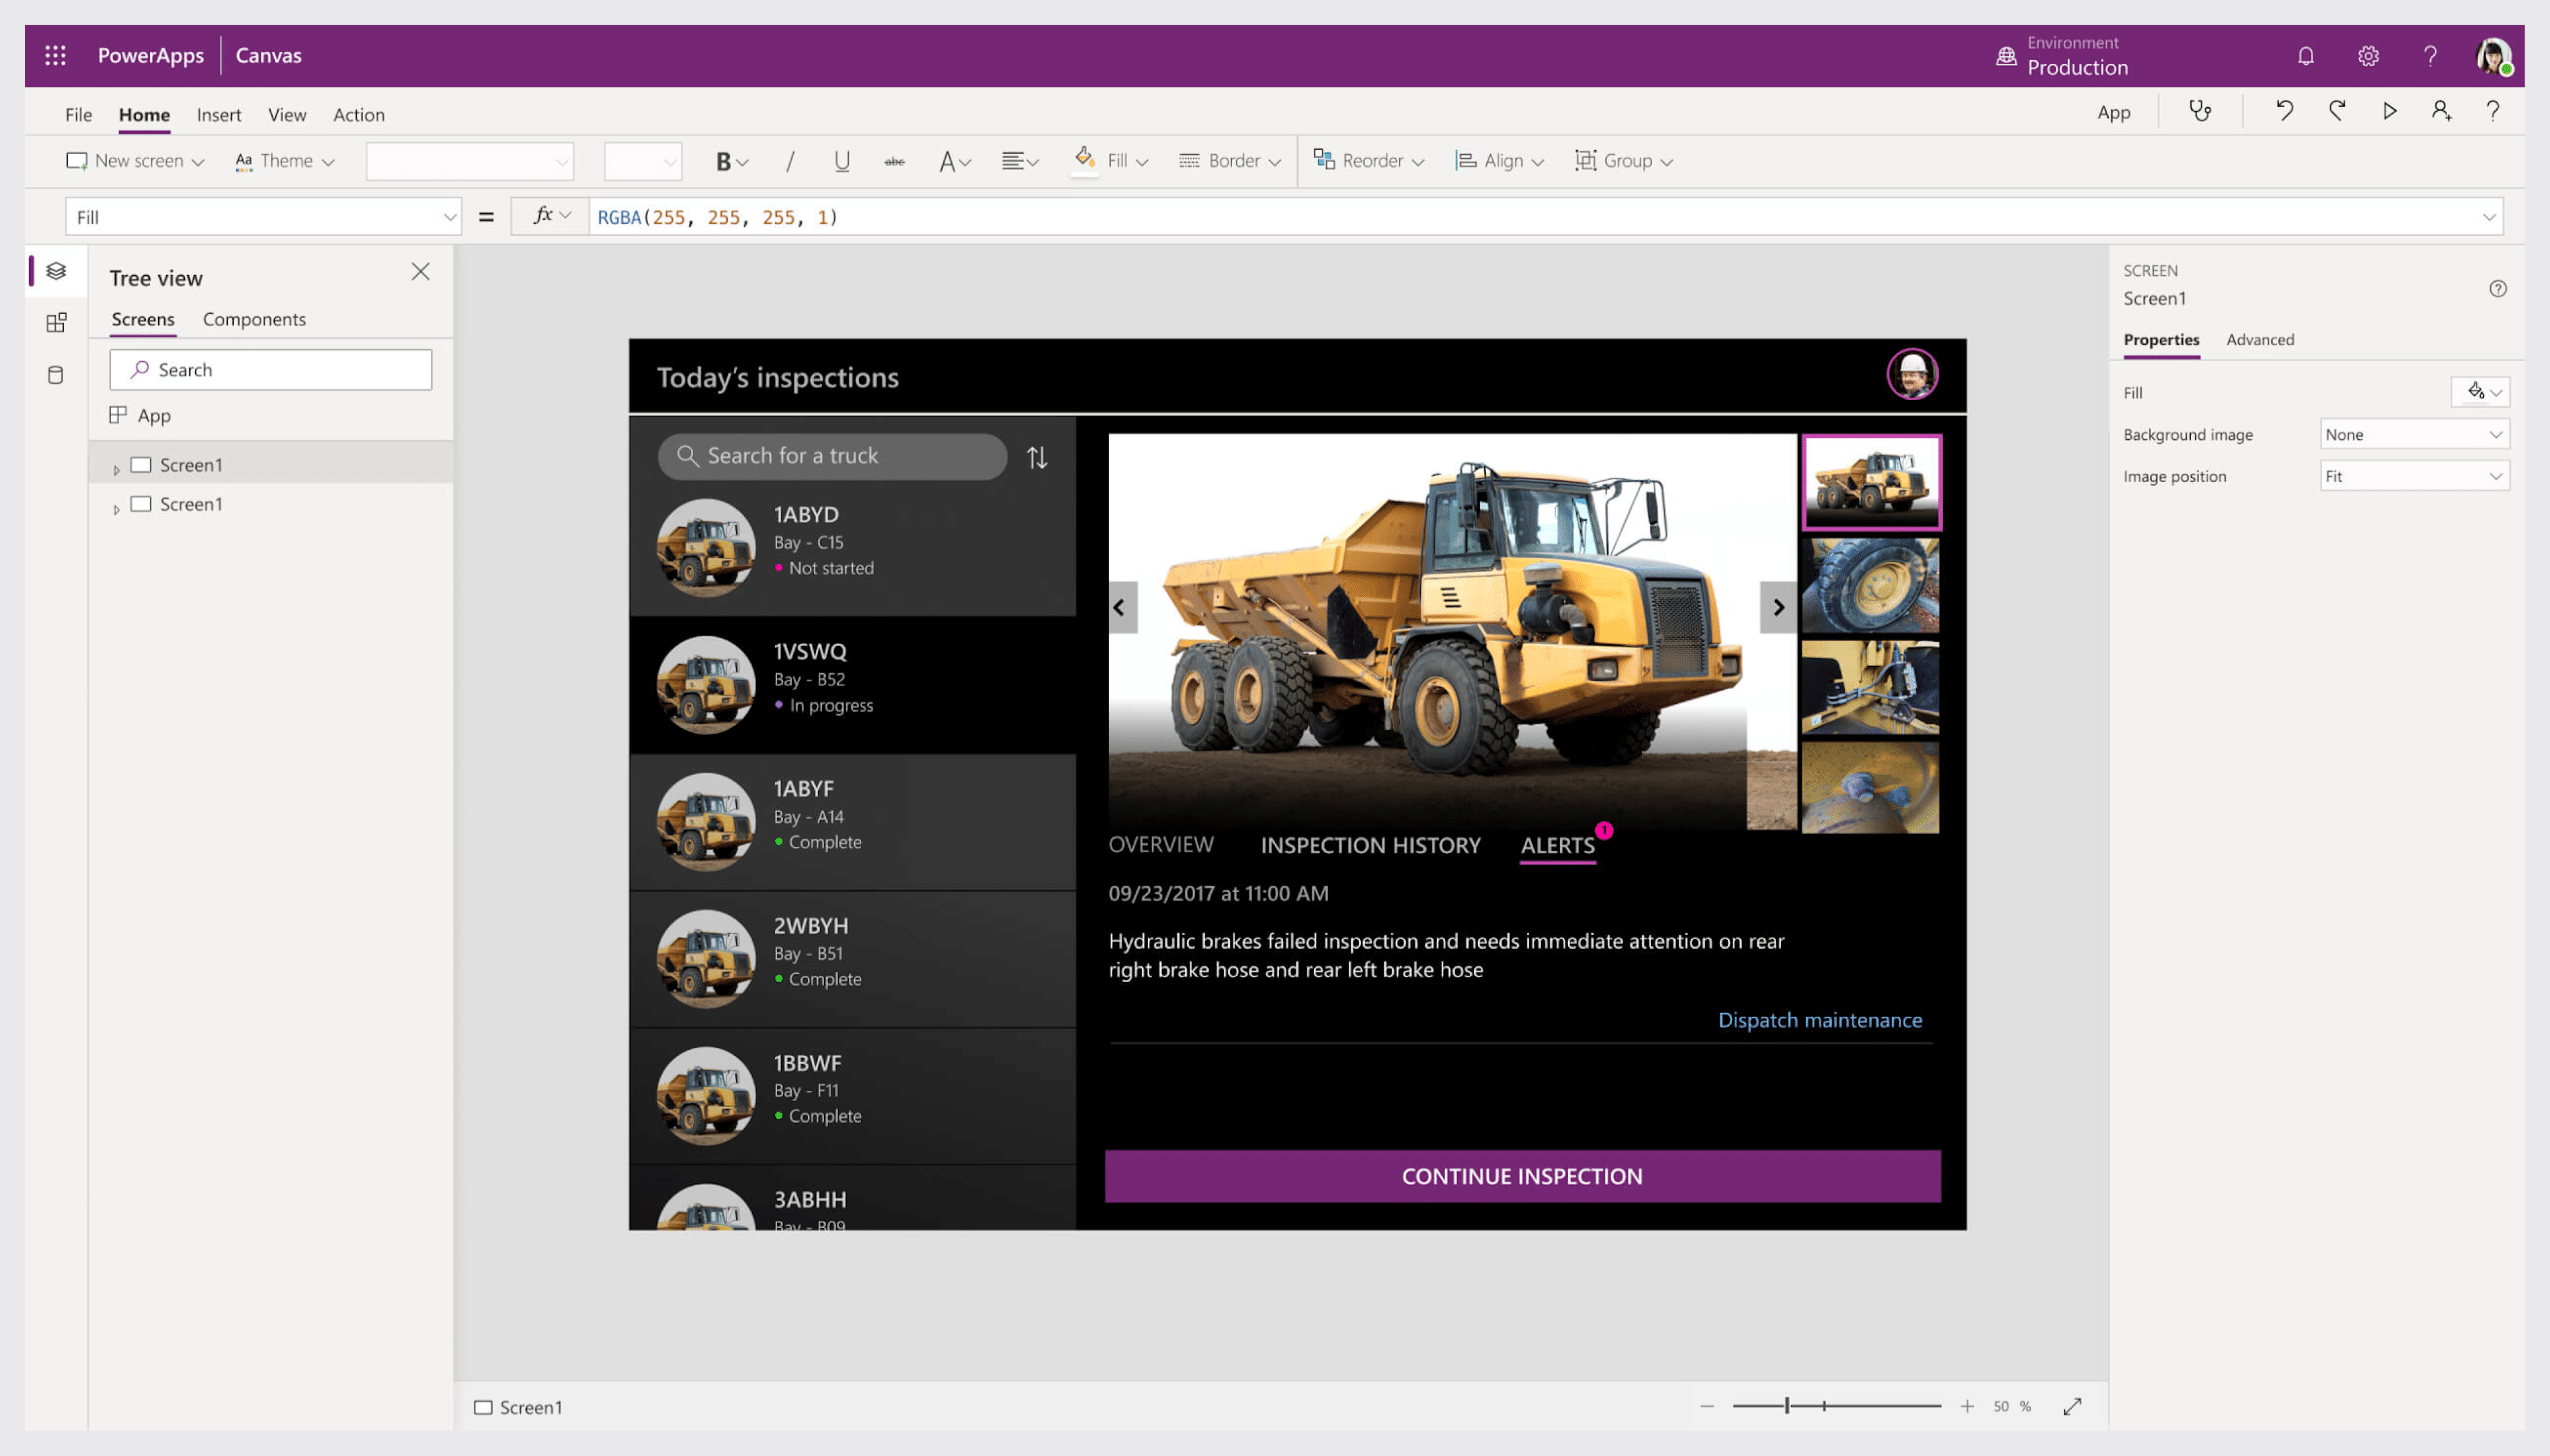 powerapps interface example